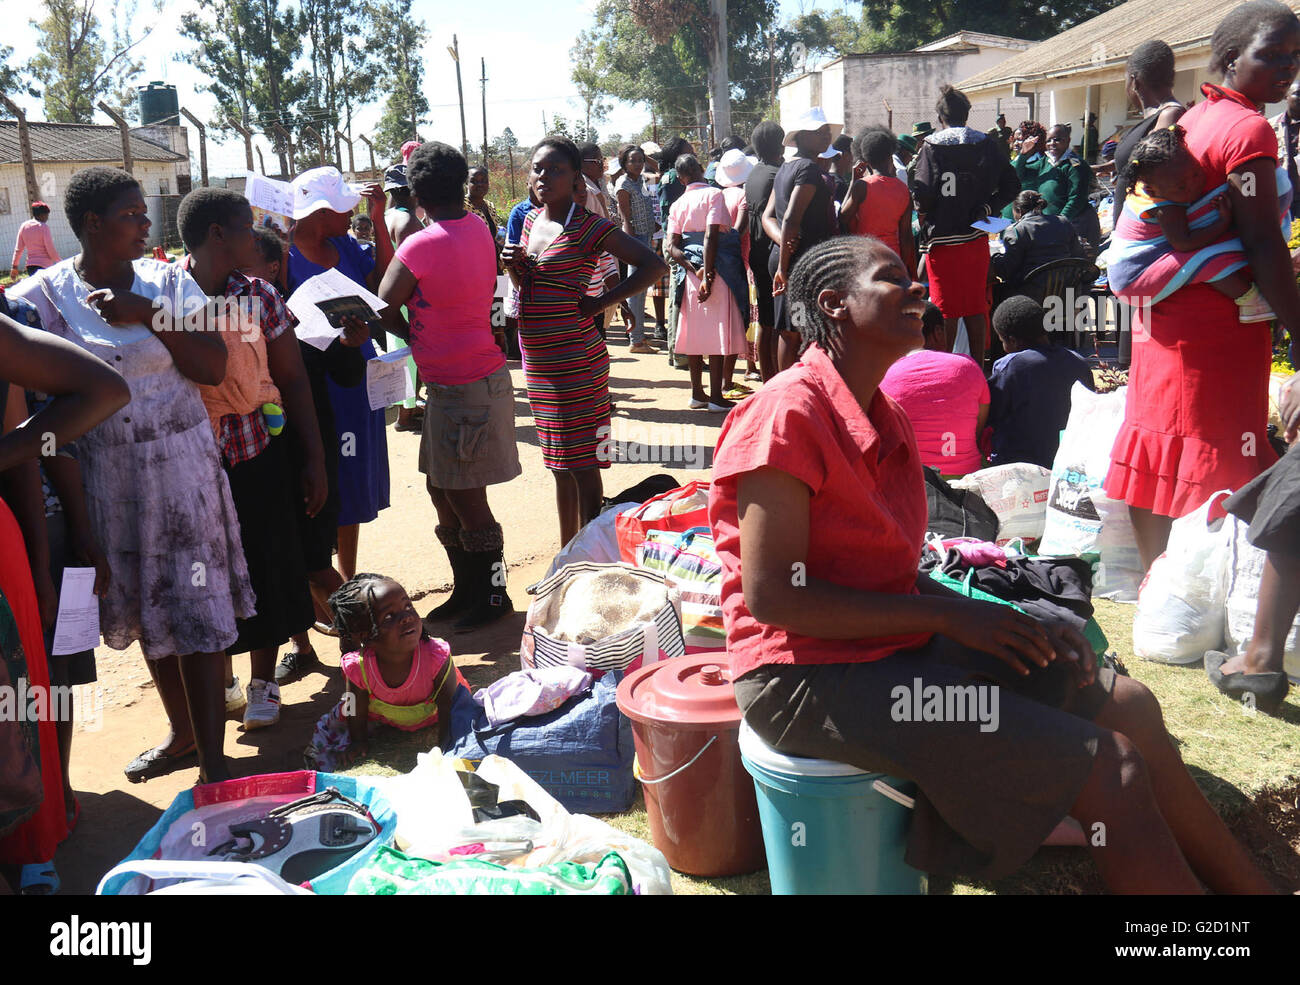 Harare. 27th May, 2016. Female prisoners prepare to go back home in Harare, Zimbabwe on May 25, 2016. Zimbabwean President Robert Mugabe has pardoned more than 2,000 inmates, mostly women and juveniles, in a move aimed at decongesting the country's overcrowded prisons, state media reported Thursday. © Xinhua/Alamy Live News Stock Photo